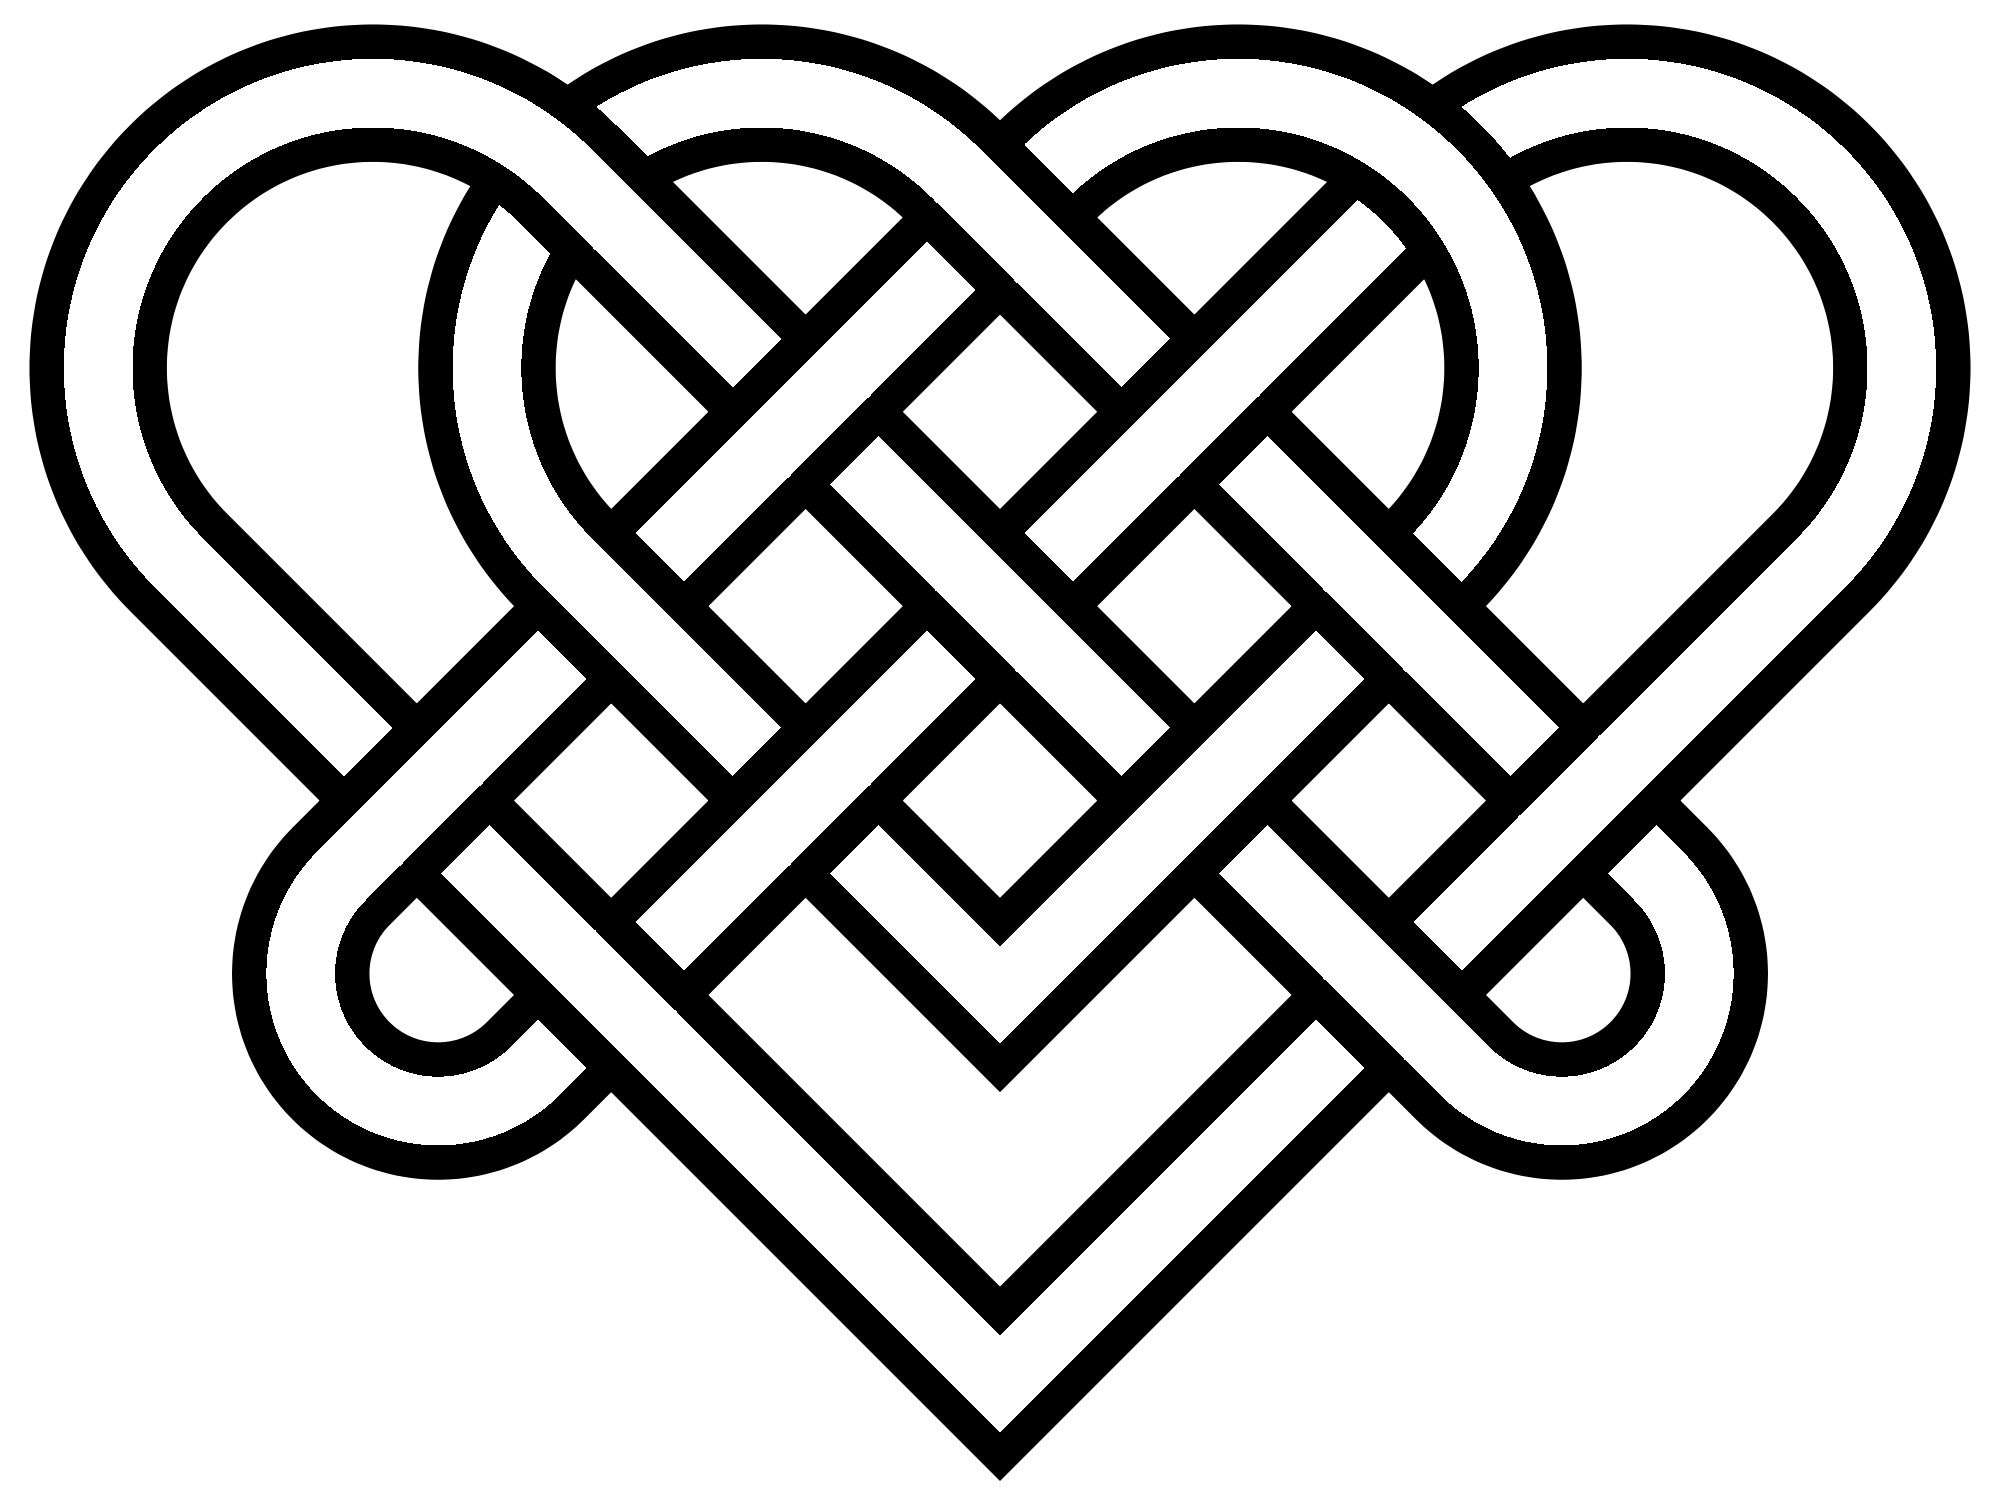 Download celtic knot heart clipart 20 free Cliparts | Download ...